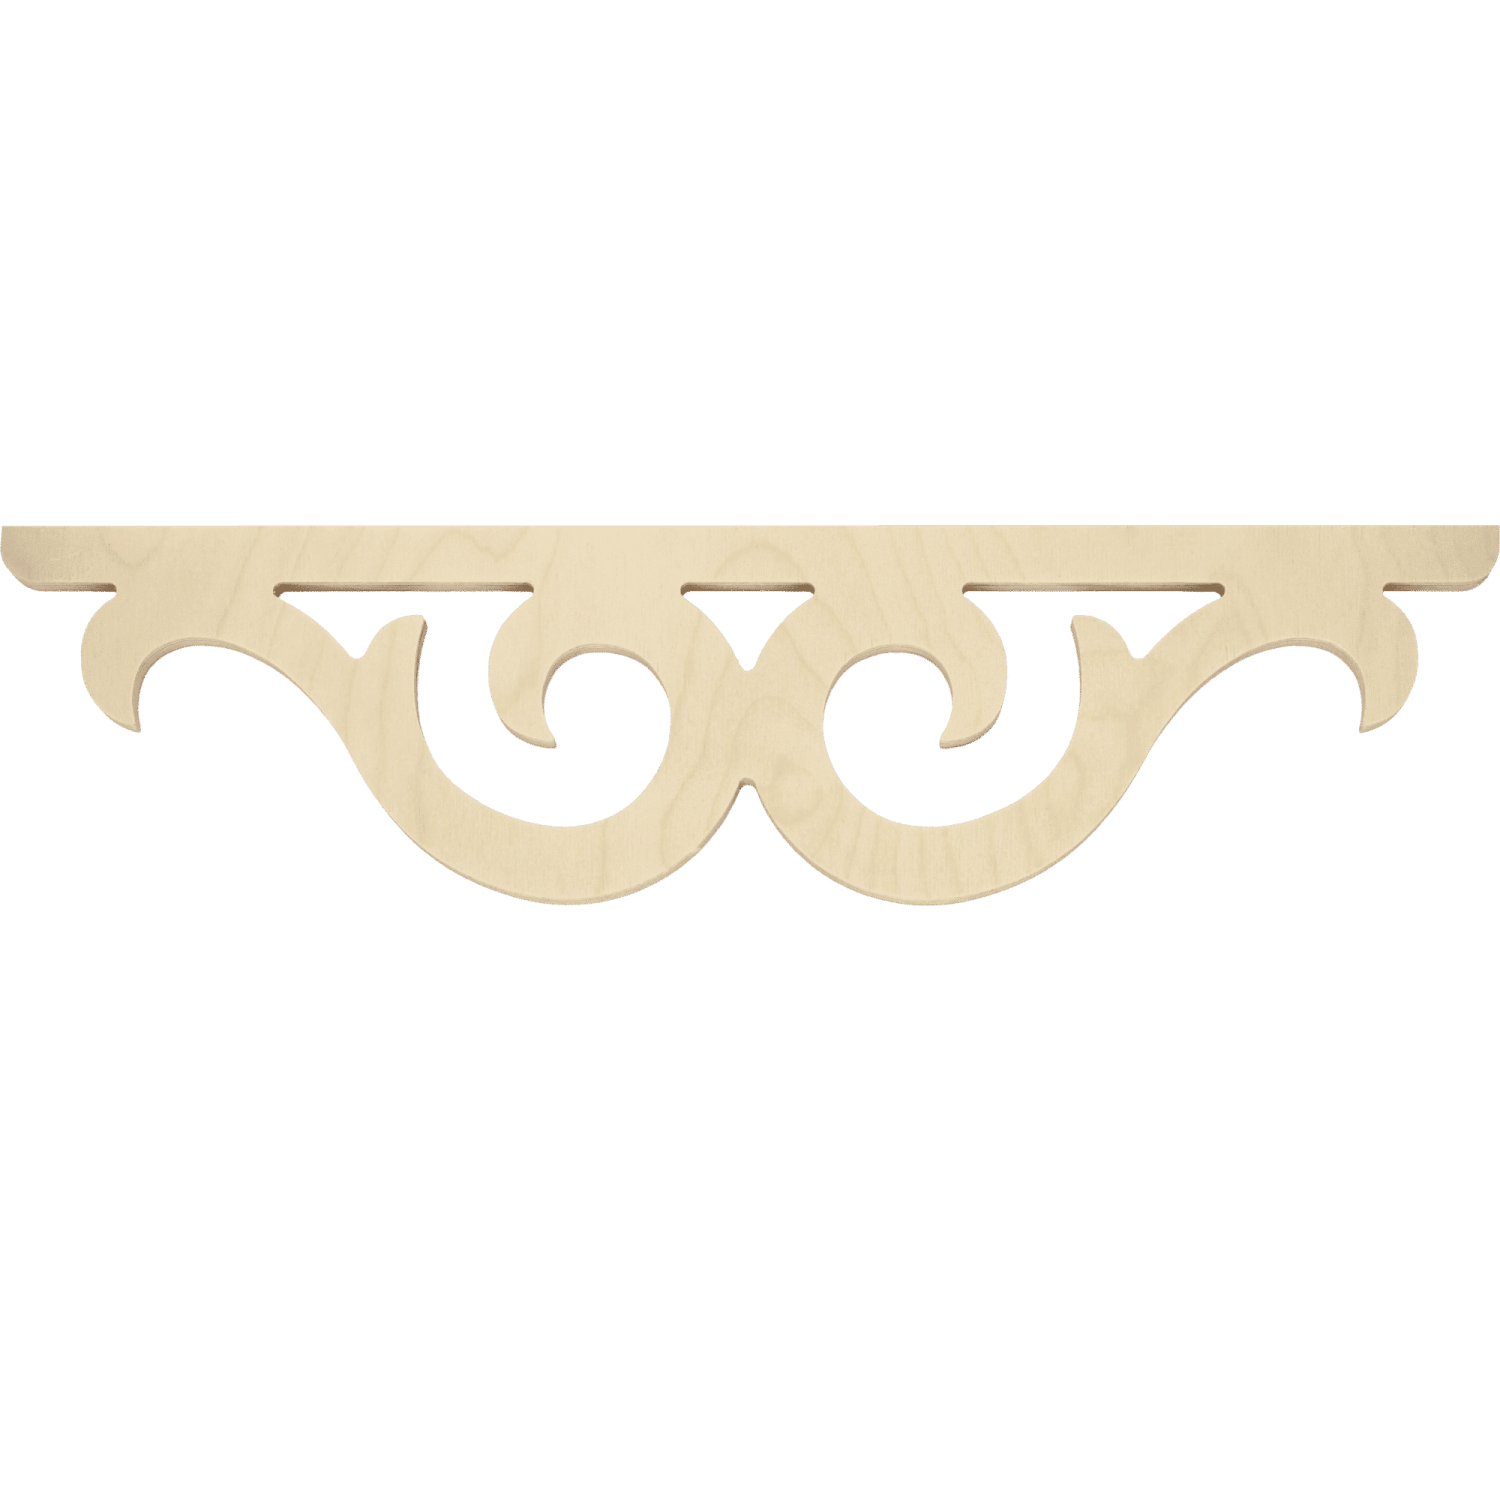 Middle bracket 016 - Classic wooden corbel & bracket buddy with ornaments for porch and veranda.